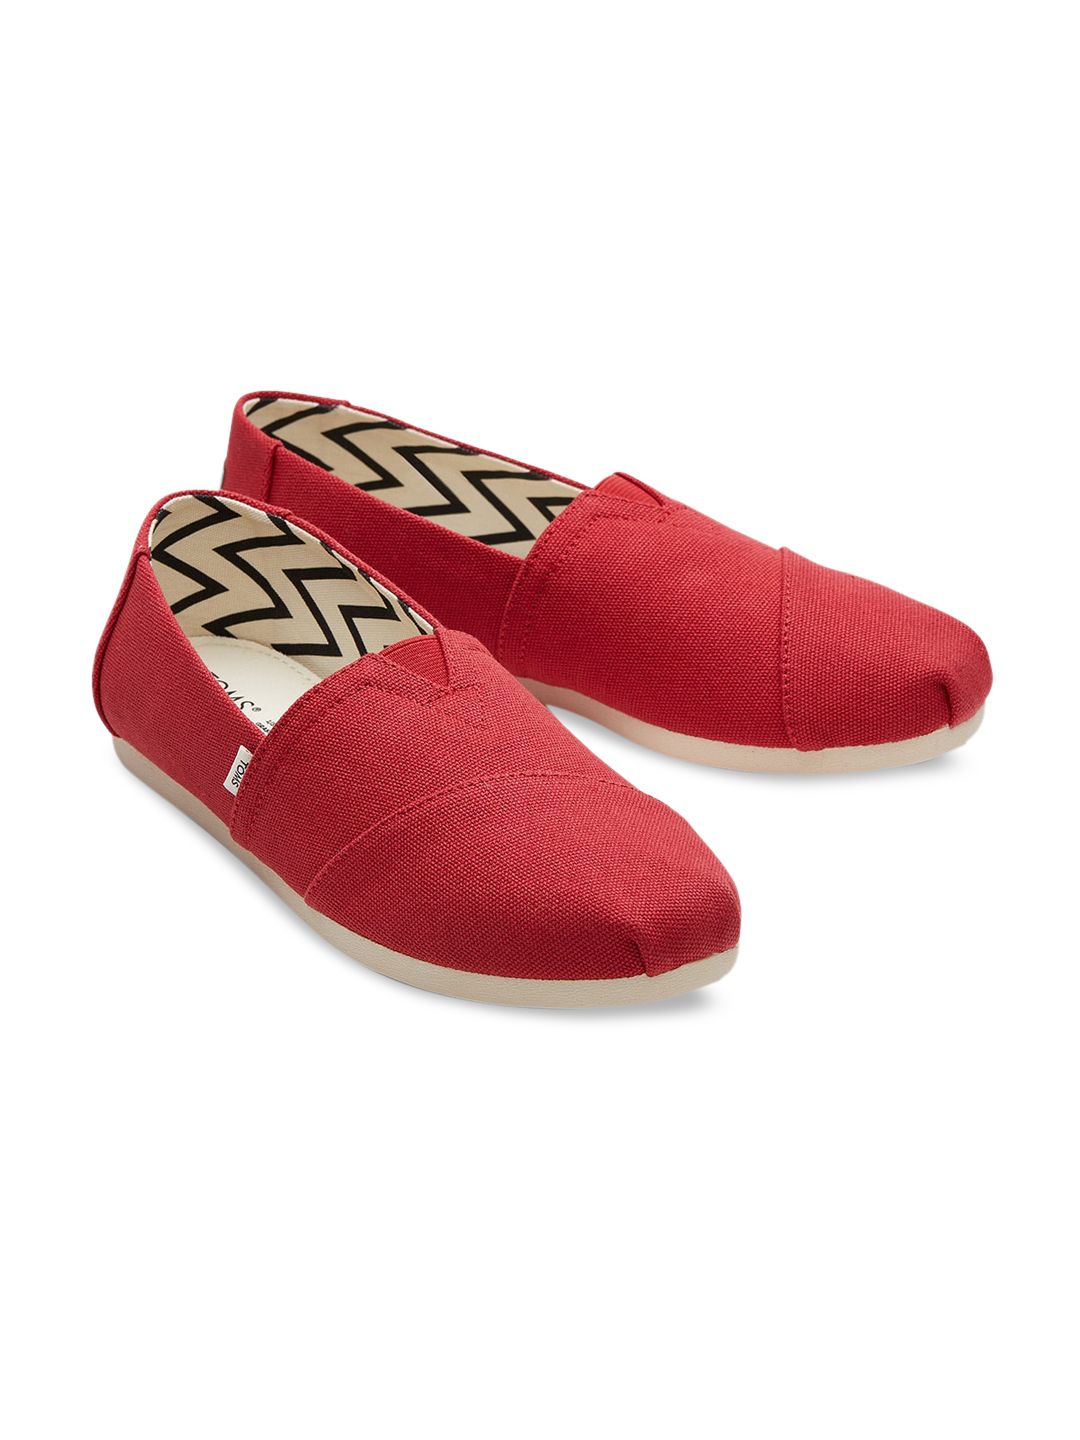 TOMS Women Red Recycled Cotton Canvas Alpargata Slip-On Sneakers Price in India